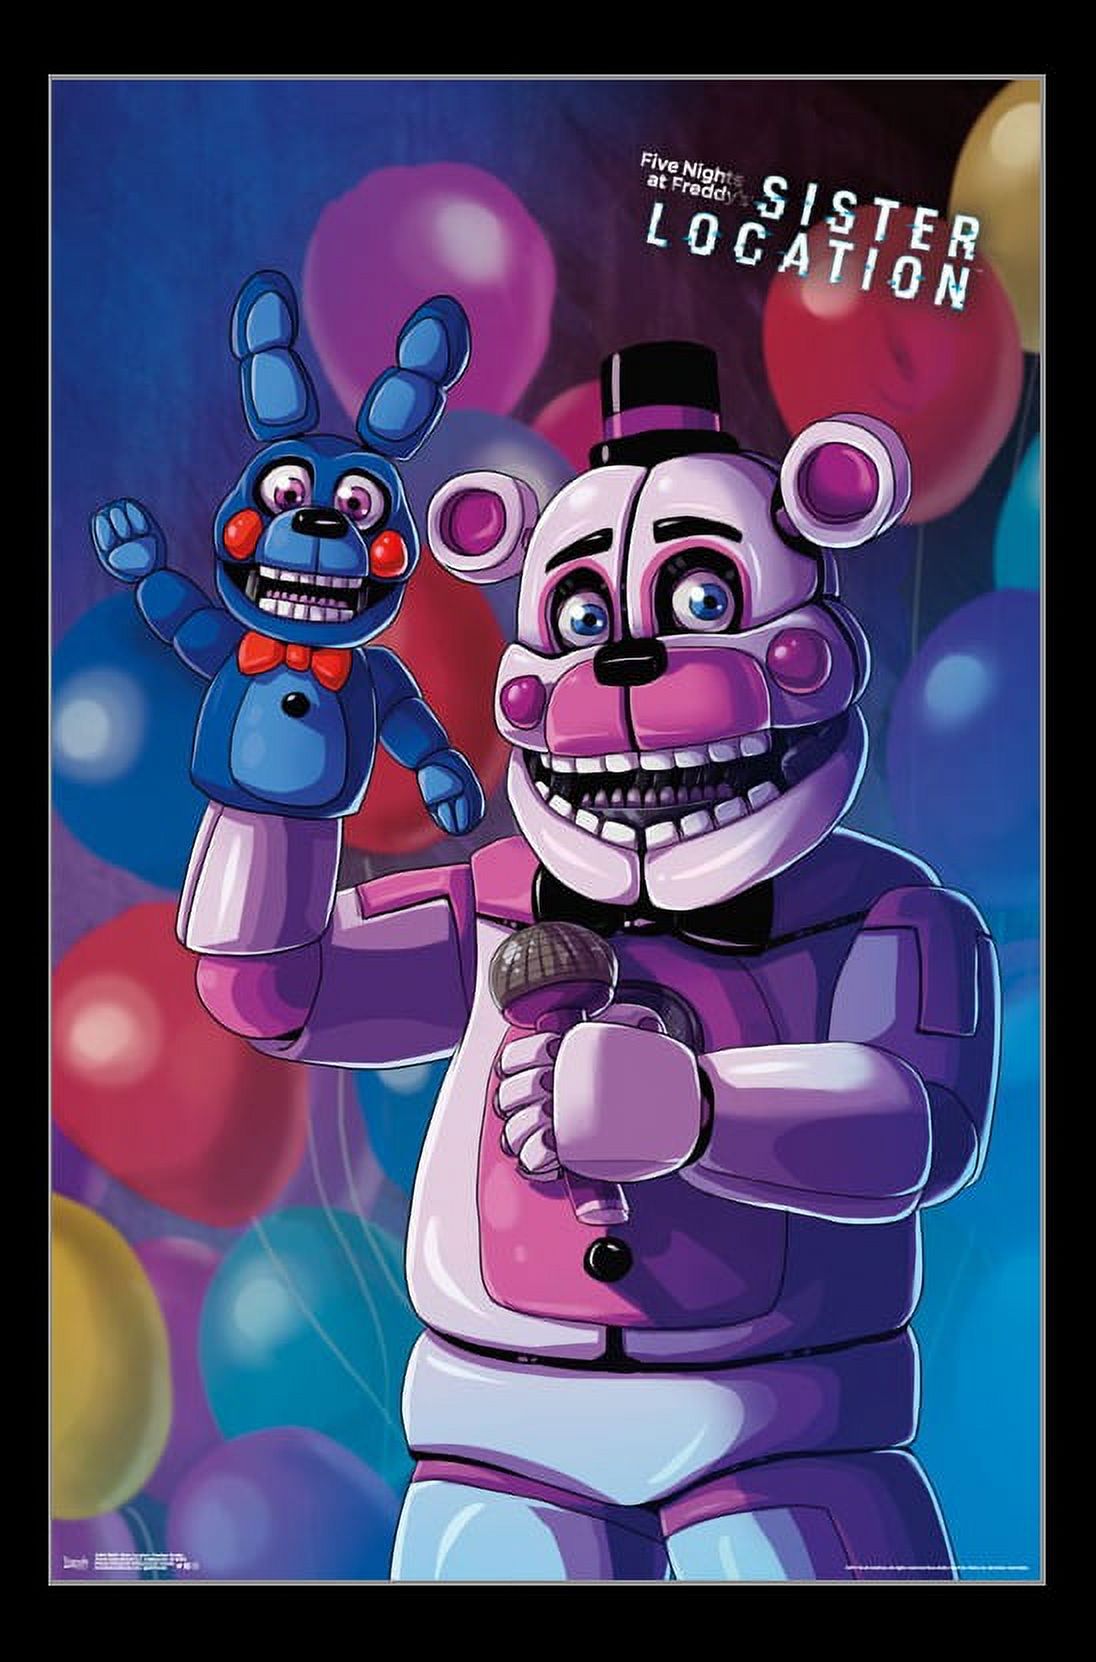 Five Nights At Freddy's Sister Location - Funtime Freddy Laminated & Framed Poster Print (22 x 34) - image 1 of 1